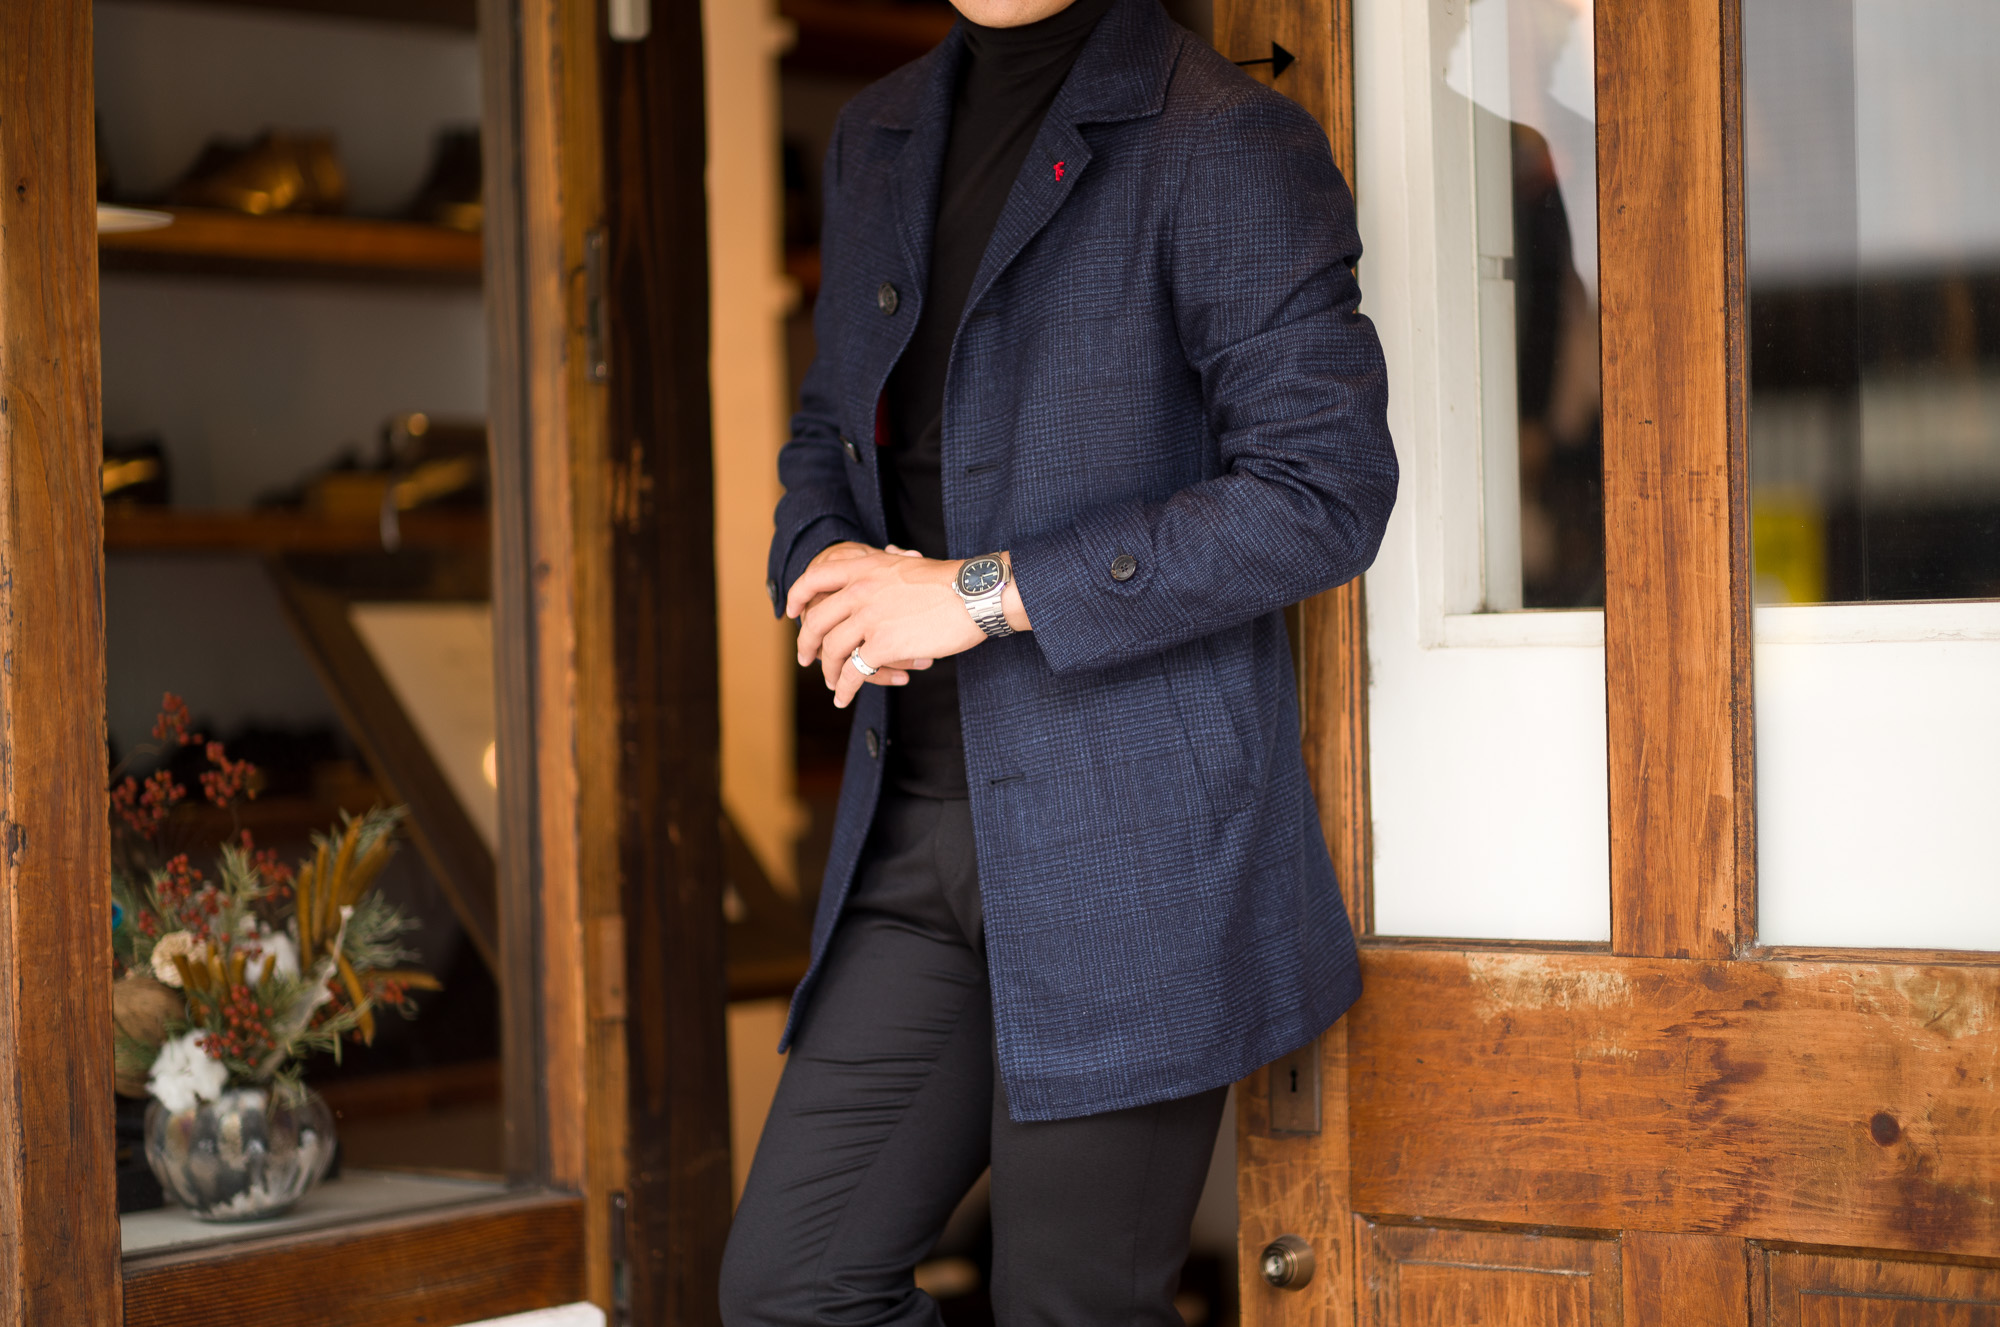 ISAIA(イザイア) CAPPOTTO(カポット) カシミヤ シルク カーコート NAVY(ネイビー) Made in italy (イタリア製) 2023【Special Model】愛知 名古屋 Alto e Diritto altoediritto アルトエデリット イザイア オーダー会 受注会